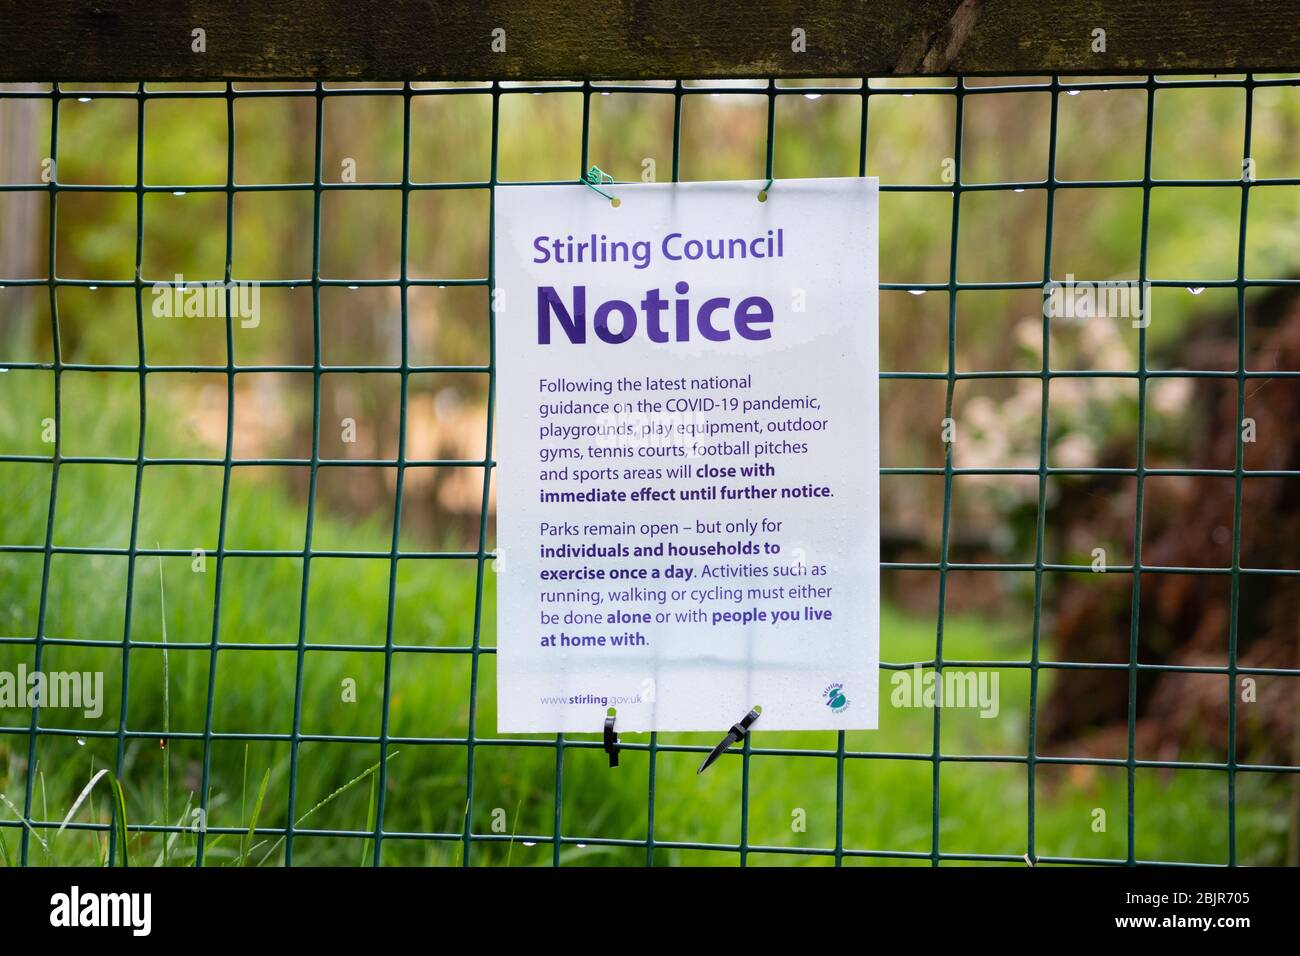 Parks open for exercise only, outdoor facilities such as playgrounds, play equipment closed information notice Killearn, Stirling, Scotland, UK Stock Photo